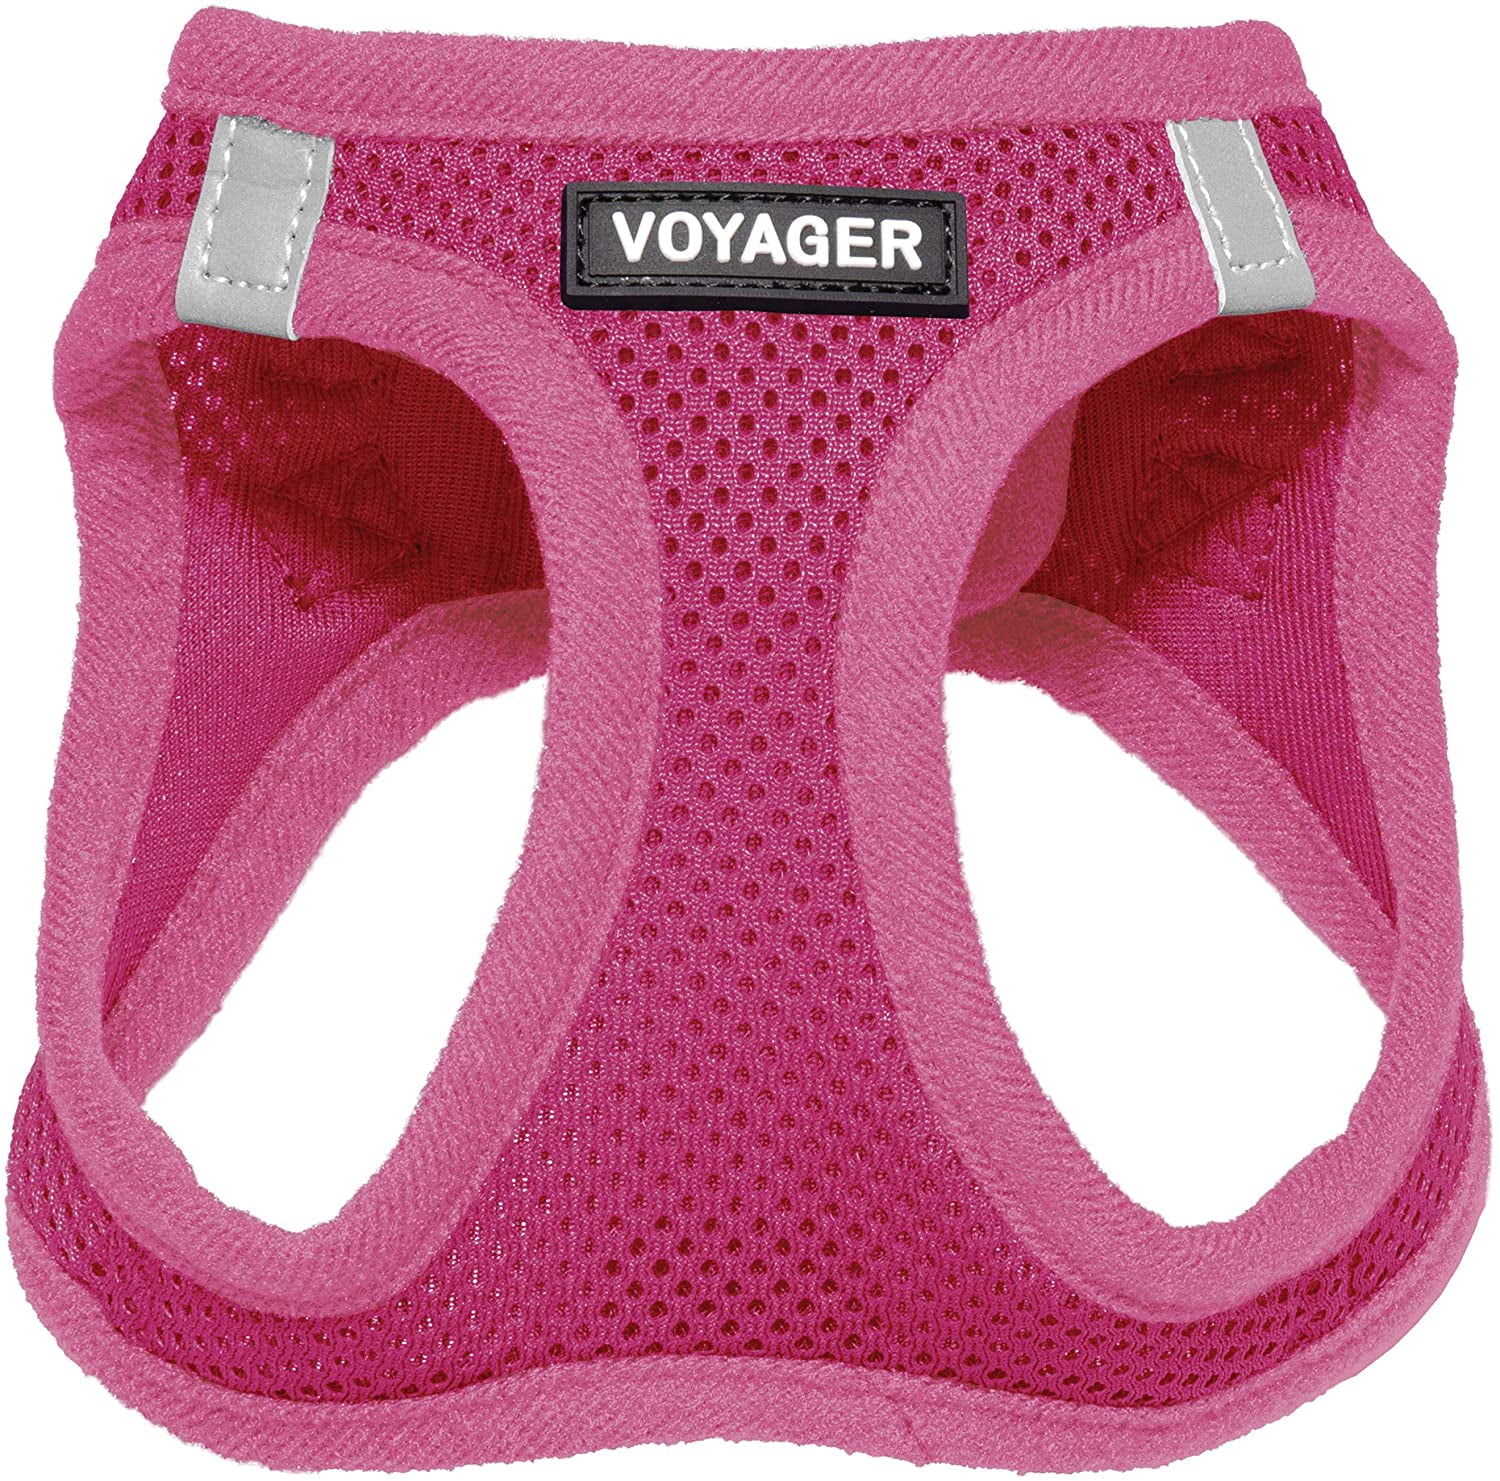 S, Pink Fida Step-in Dog Harness Adjustable Harness for Small Dogs Superior Reflective Puppy Vest Harness- All Weather Air Mesh